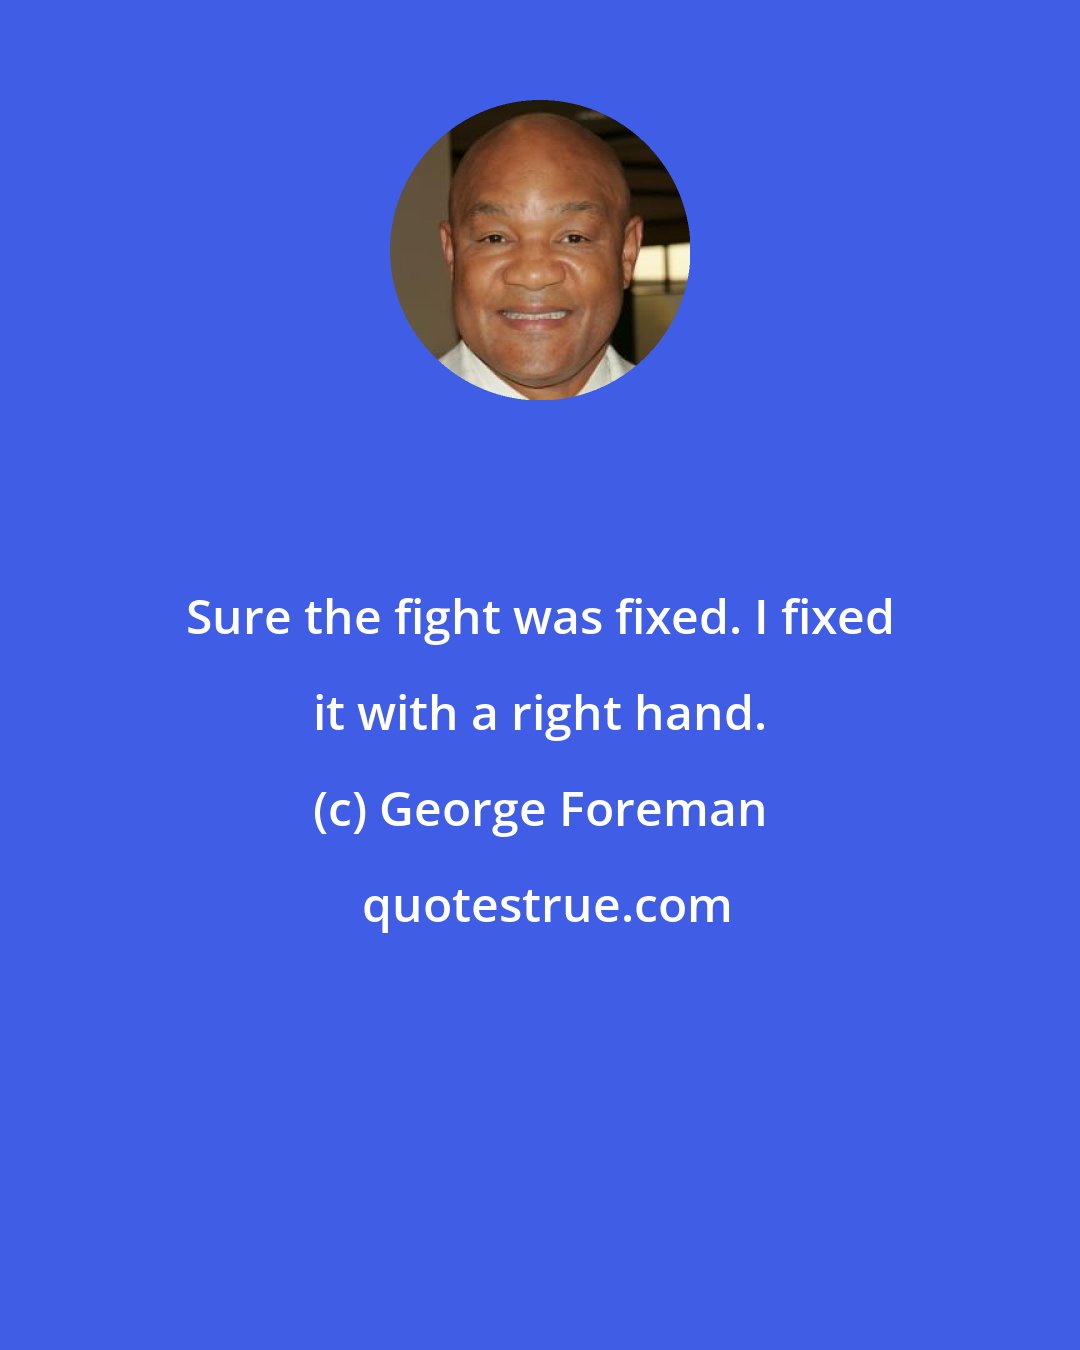 George Foreman: Sure the fight was fixed. I fixed it with a right hand.